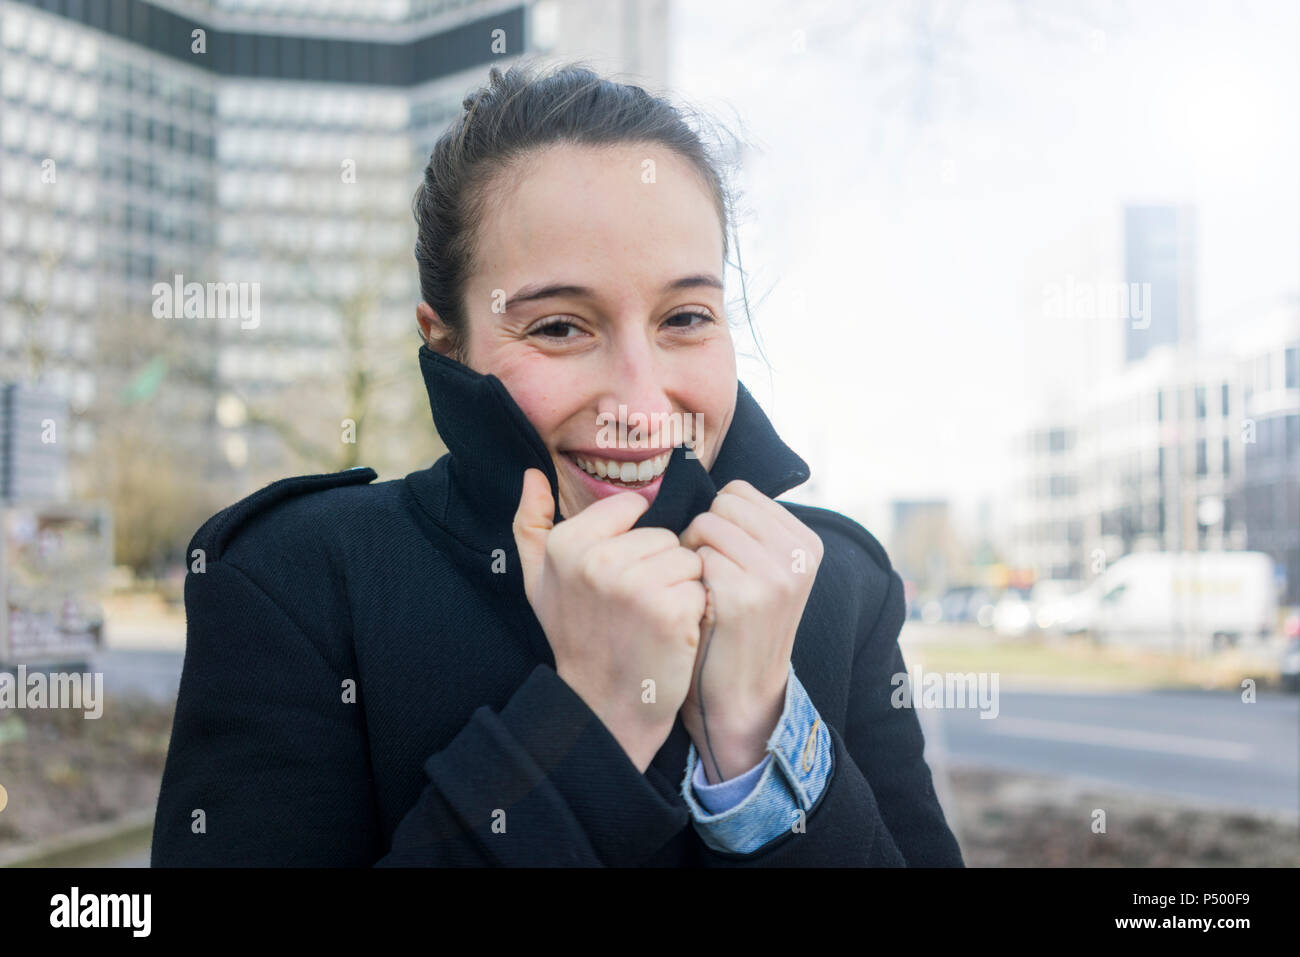 Germany, Essen, portrait of freezing young woman Stock Photo